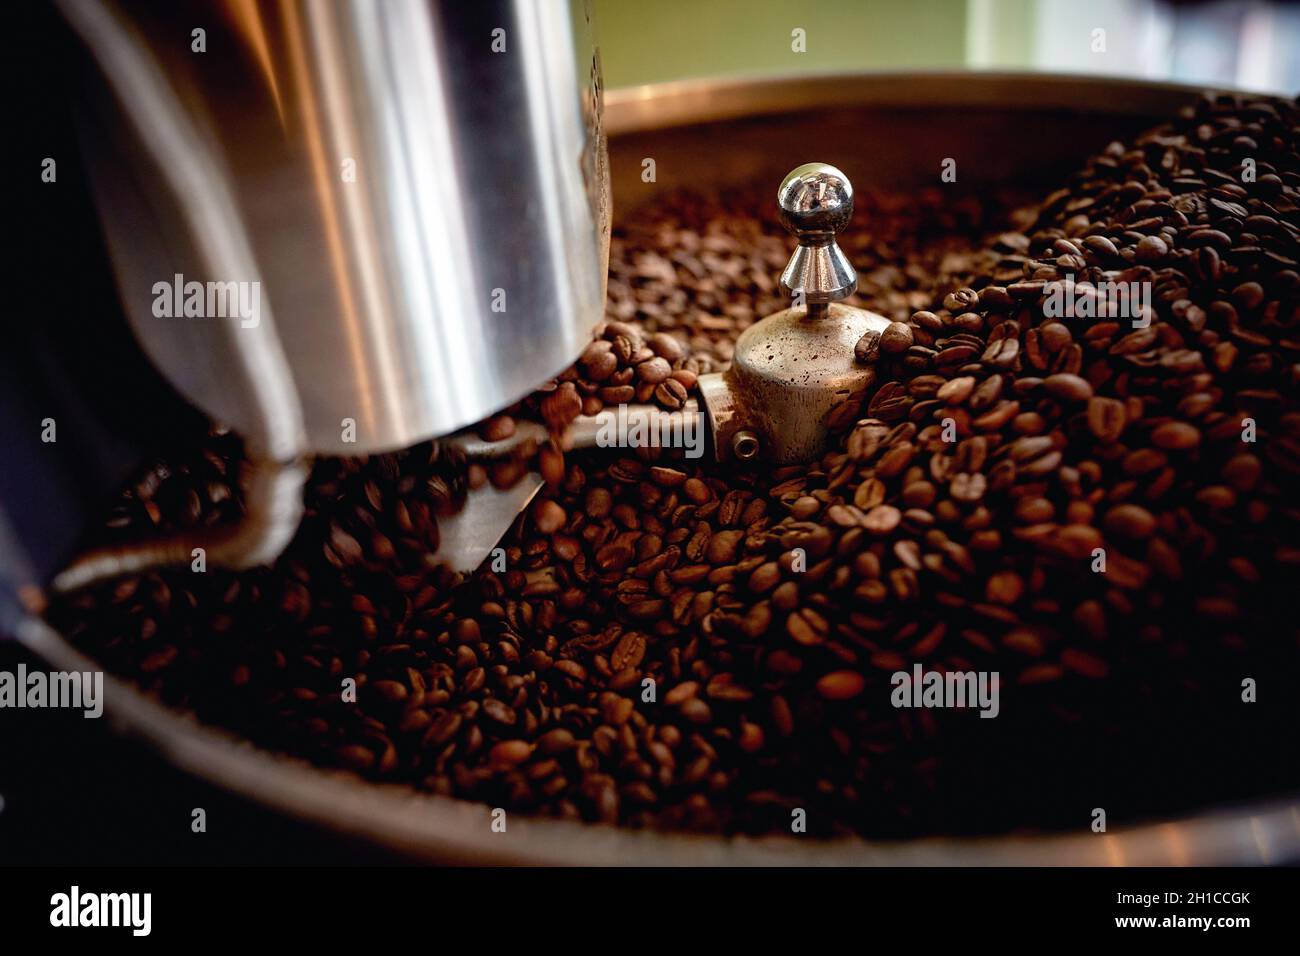 A bunch of fragrant and aromatic roasted coffee beans in a grinder apparatus. Coffee, beverage, producing Stock Photo